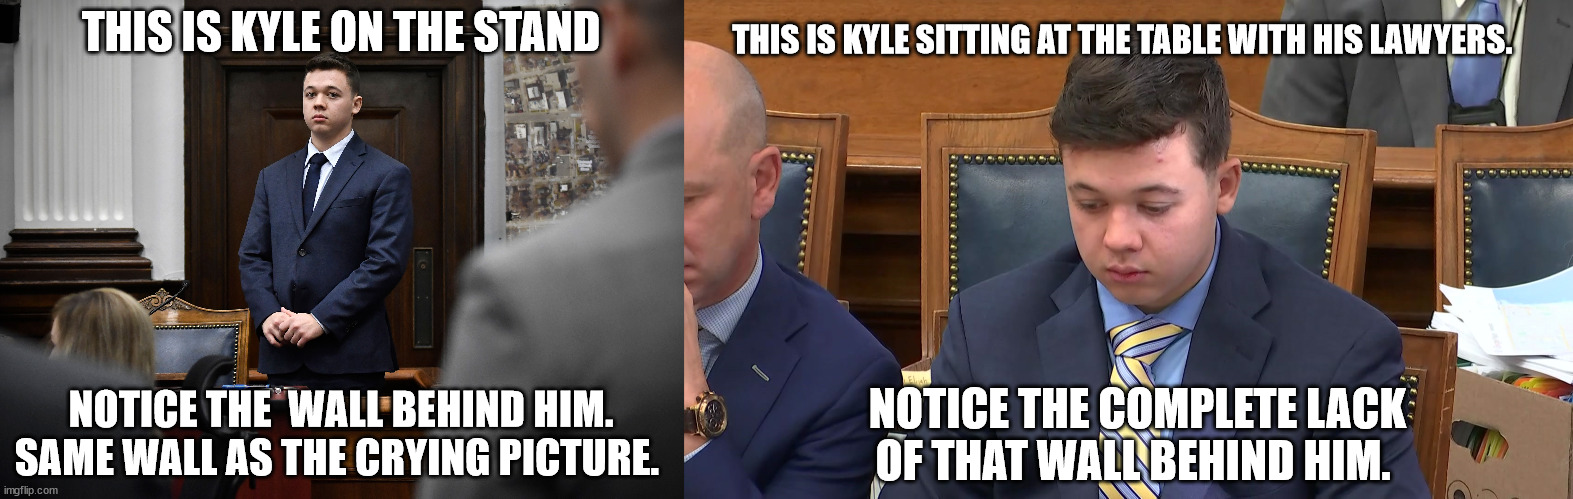 THIS IS KYLE ON THE STAND NOTICE THE  WALL BEHIND HIM. SAME WALL AS THE CRYING PICTURE. THIS IS KYLE SITTING AT THE TABLE WITH HIS LAWYERS.  | made w/ Imgflip meme maker